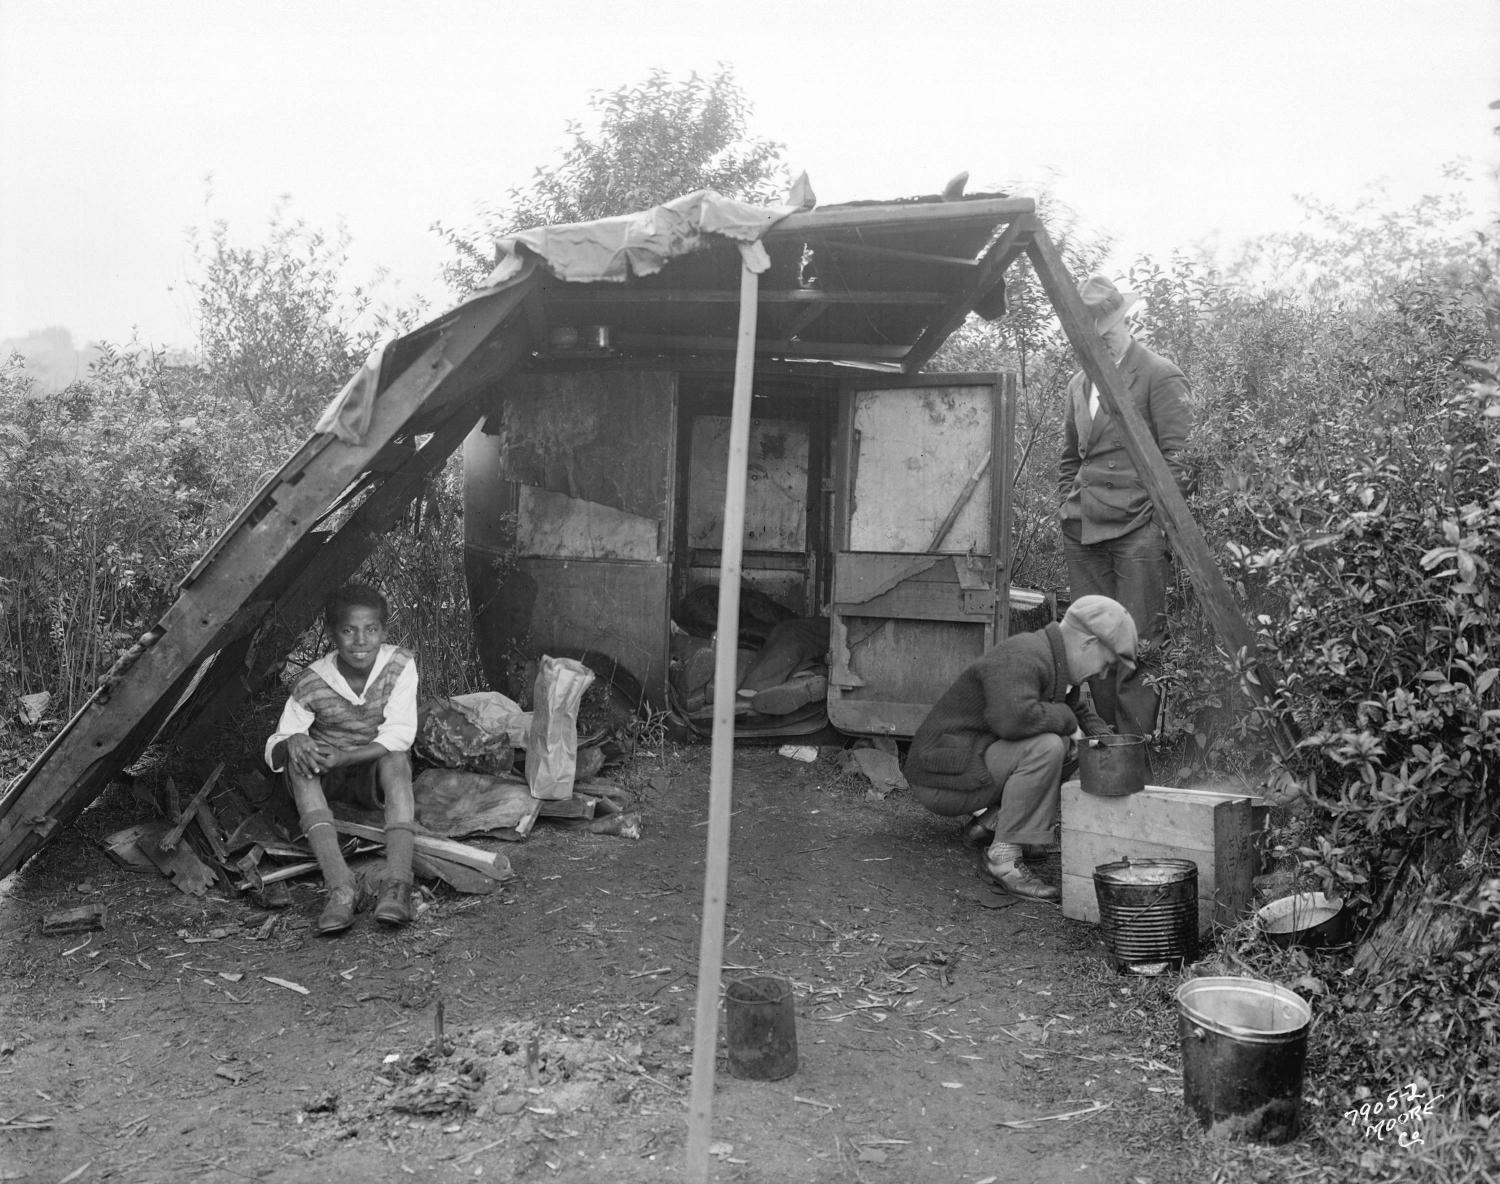 Three men in shelter in the 'Jungle' at the City dump